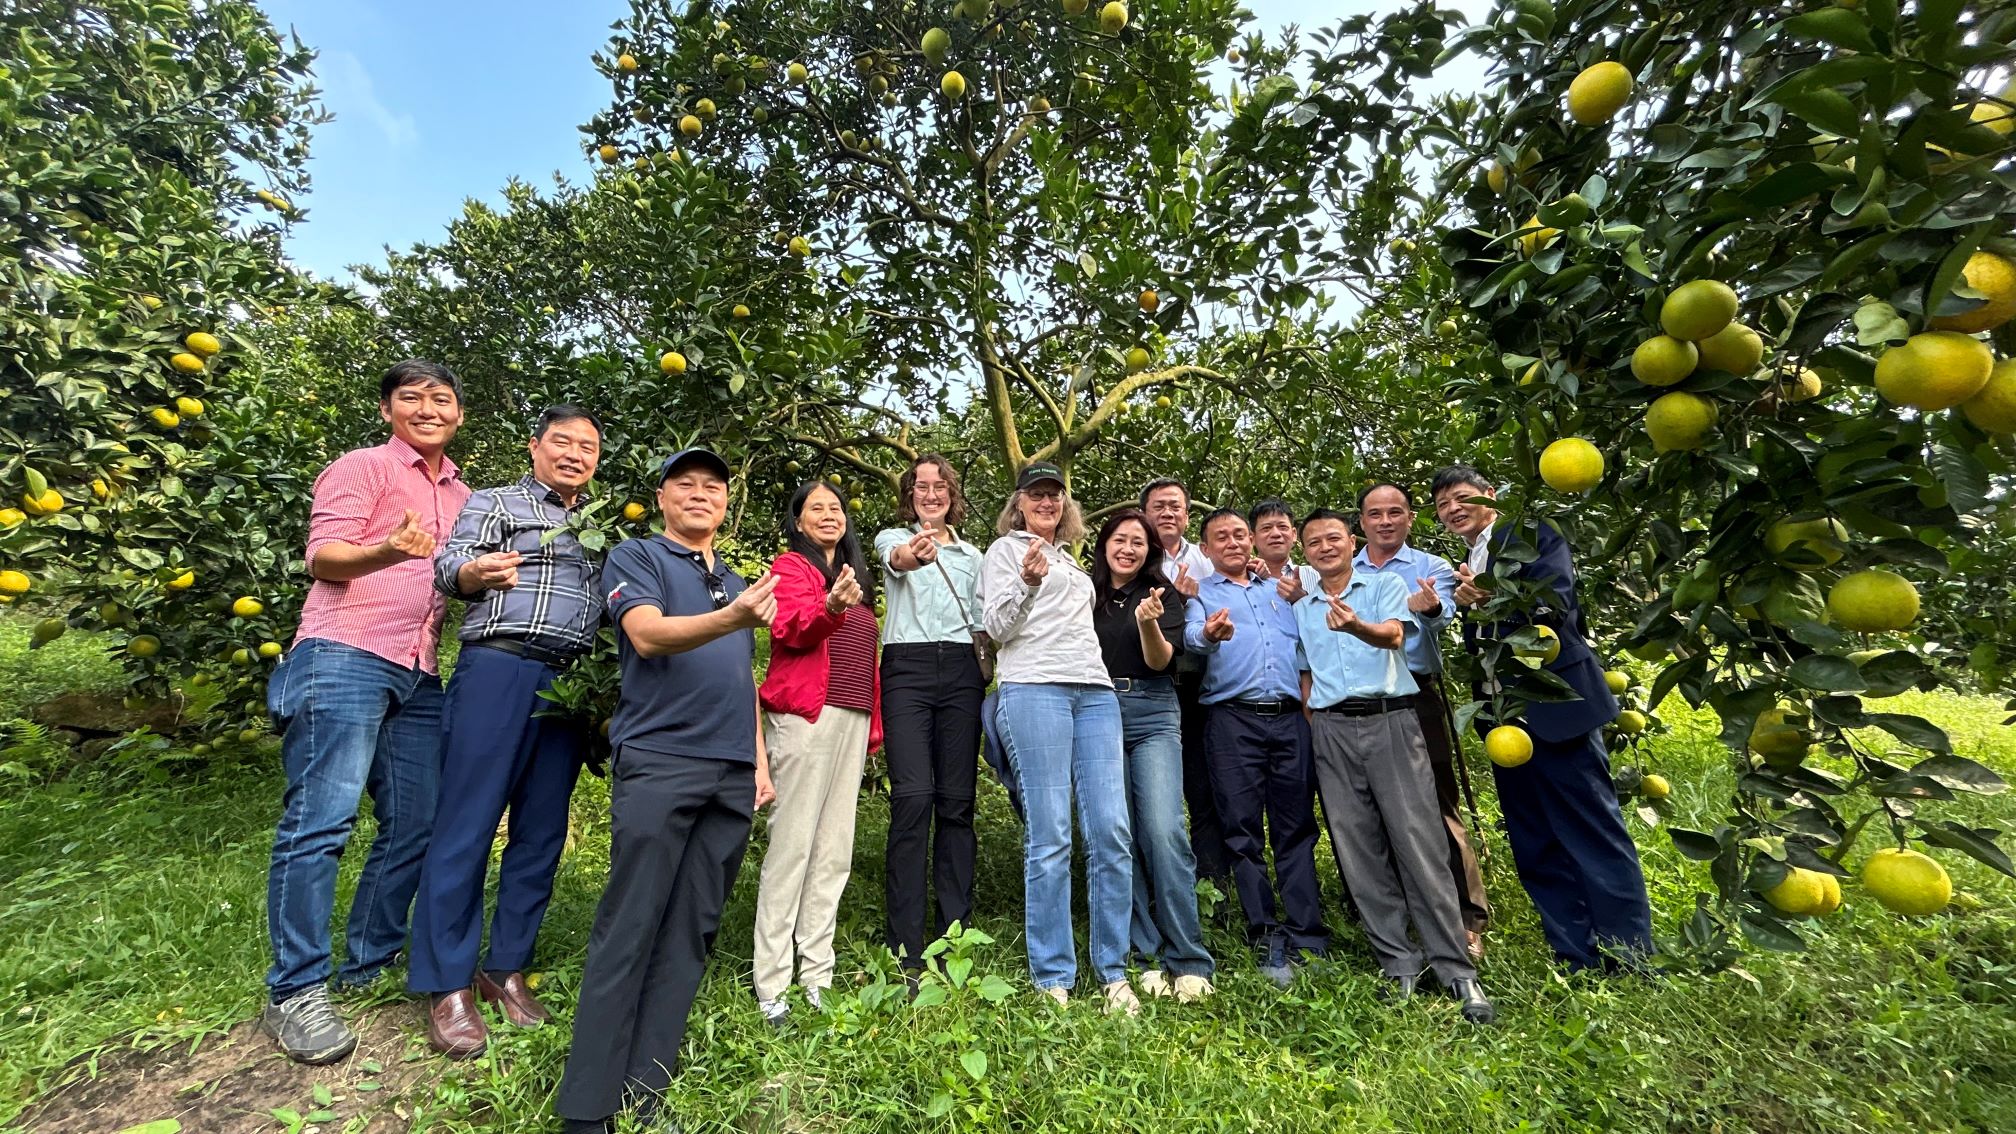 Group of people in orchard smiling with fingers in shape of love heart